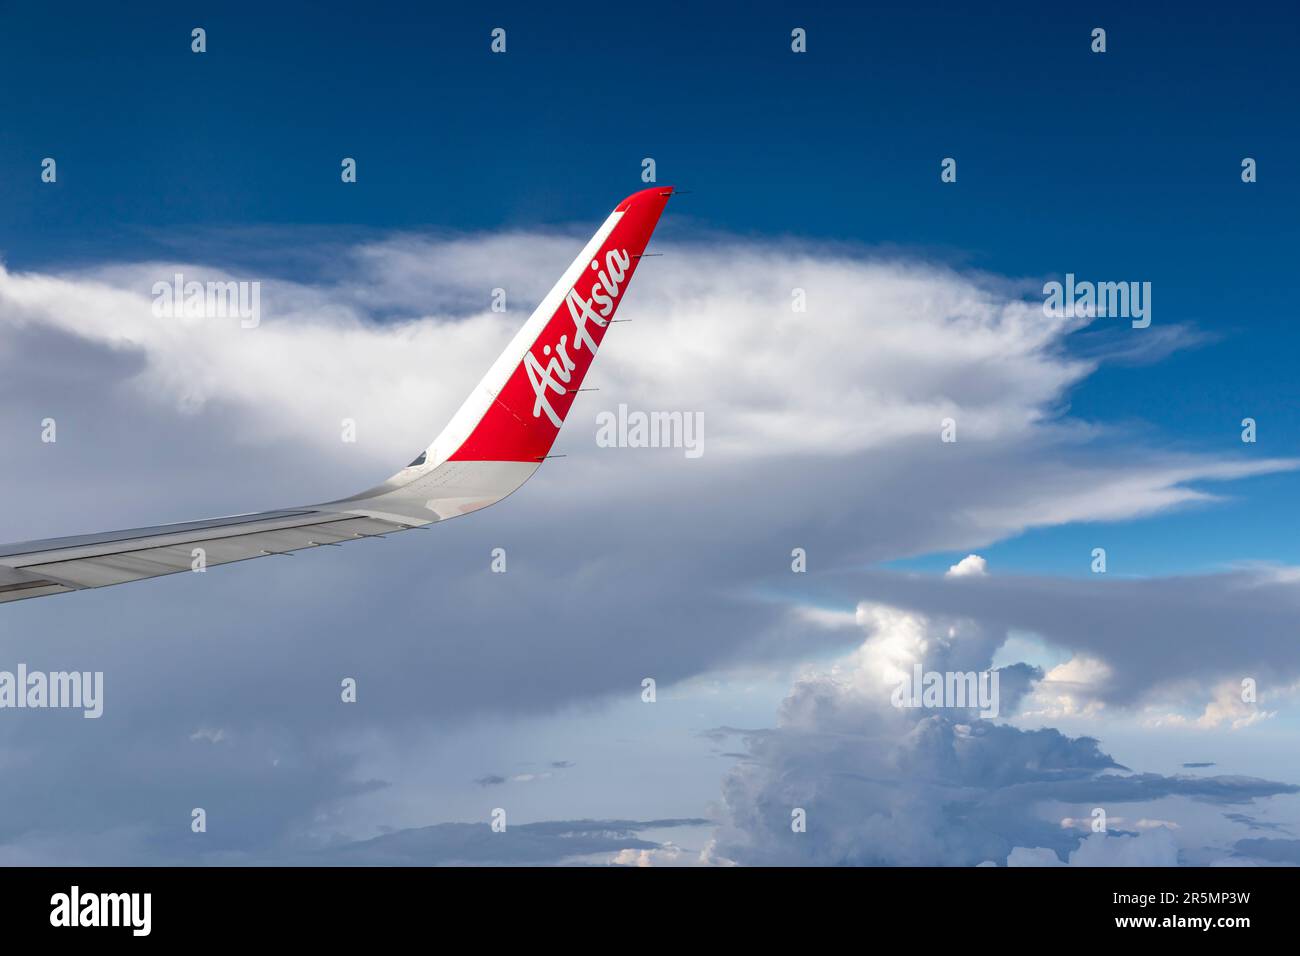 Bangkok Thailand - March 30, 2019: The trademark logo on the wing of AirAsia, a popular low-cost airline in many countries, is soaring in the sky agai Stock Photo